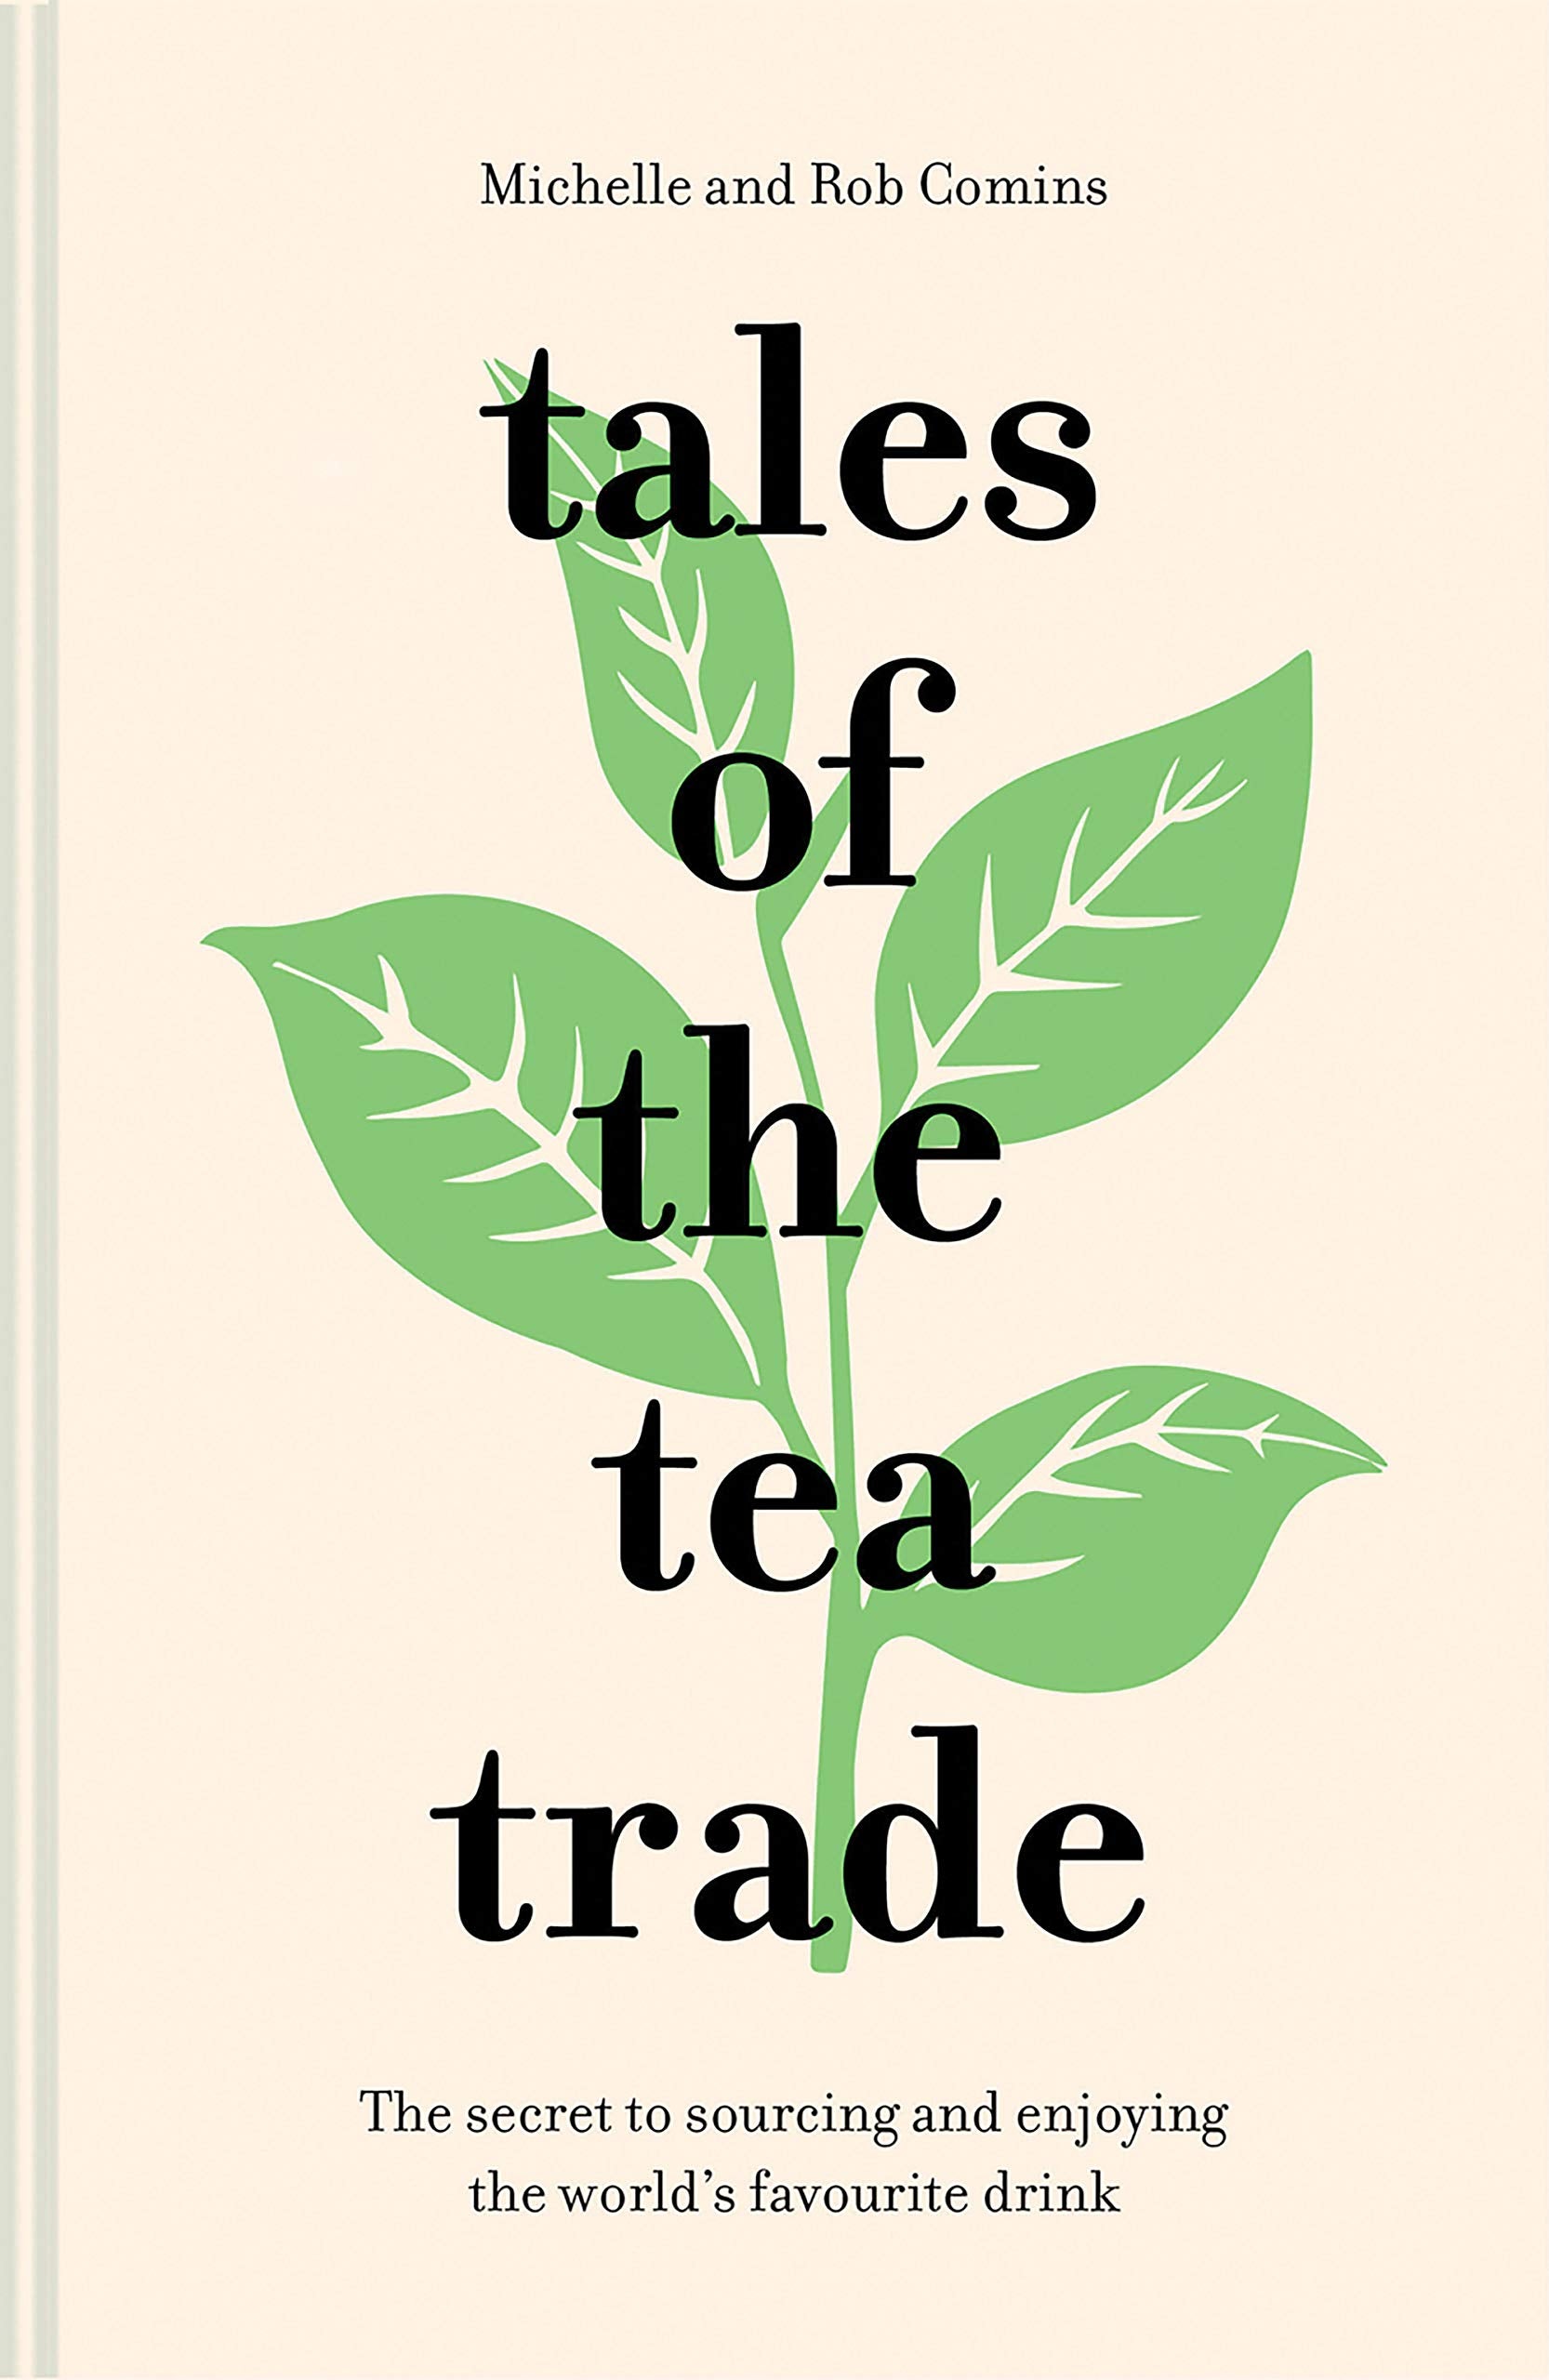 Tales of the Tea Trade: The Secret to Sourcing and Enjoying the World's Favorite Drink (Michelle Comins and Rob Comins)